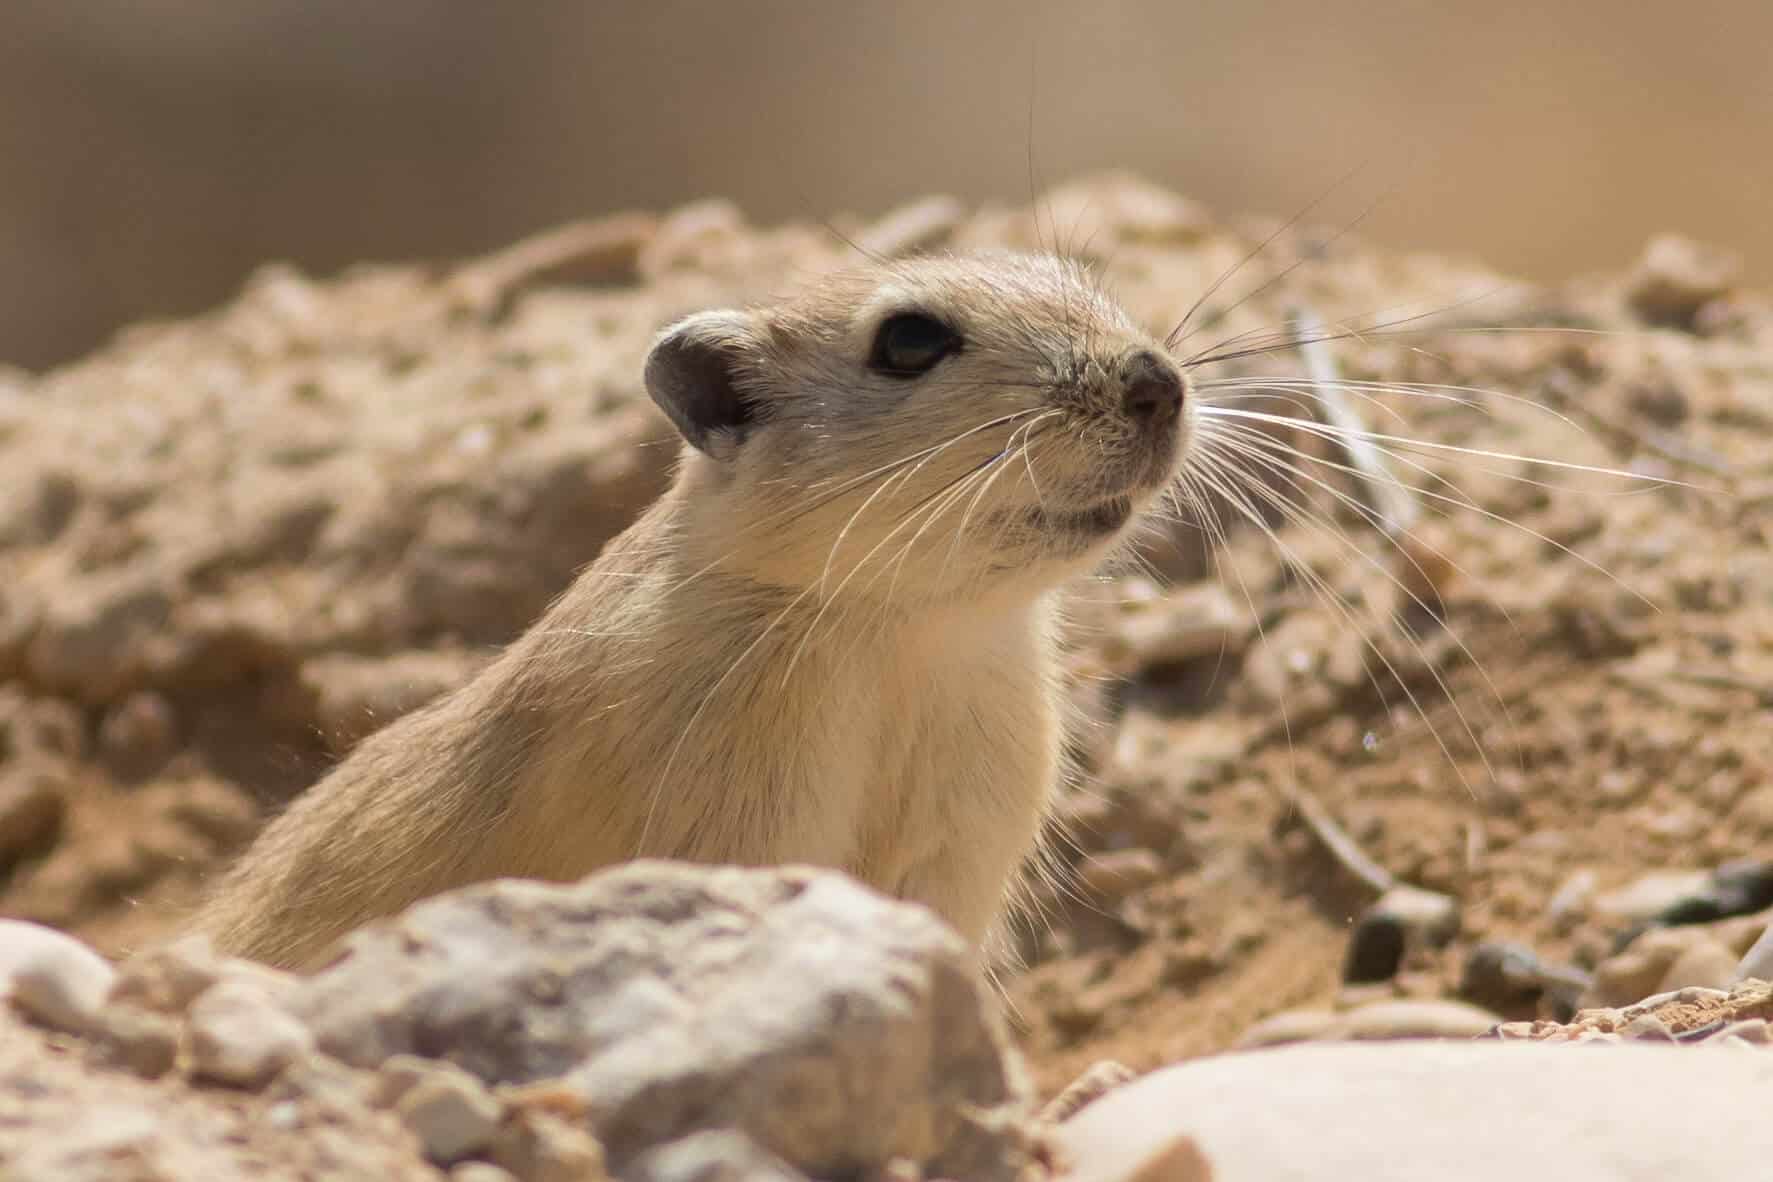 Even in Israel there are various endangered species and some of them are not defined as such in other parts of the world. Southern gerbil. Photo: MimoZig, CC BY-SA 4.0